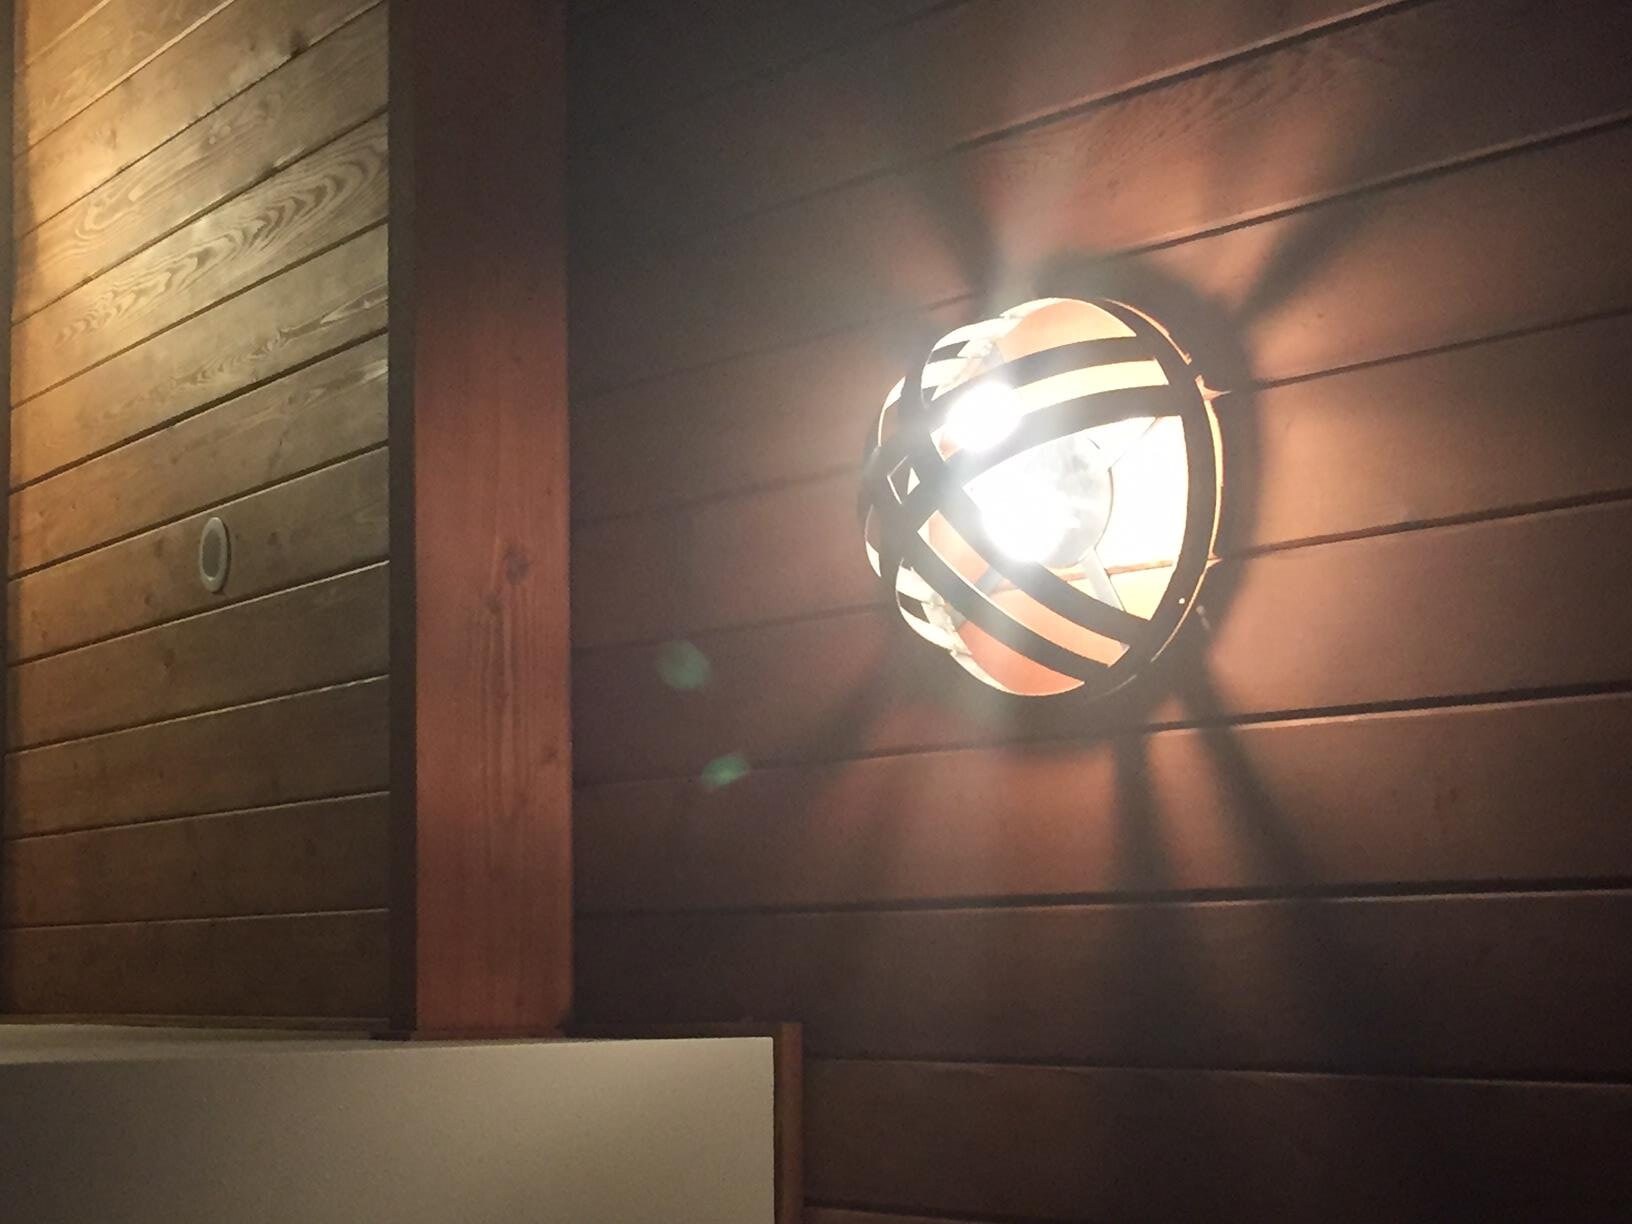 Wine Barrel Sconce Light - Pesini - Made from retired California wine barrel rings. 100% Recycled!